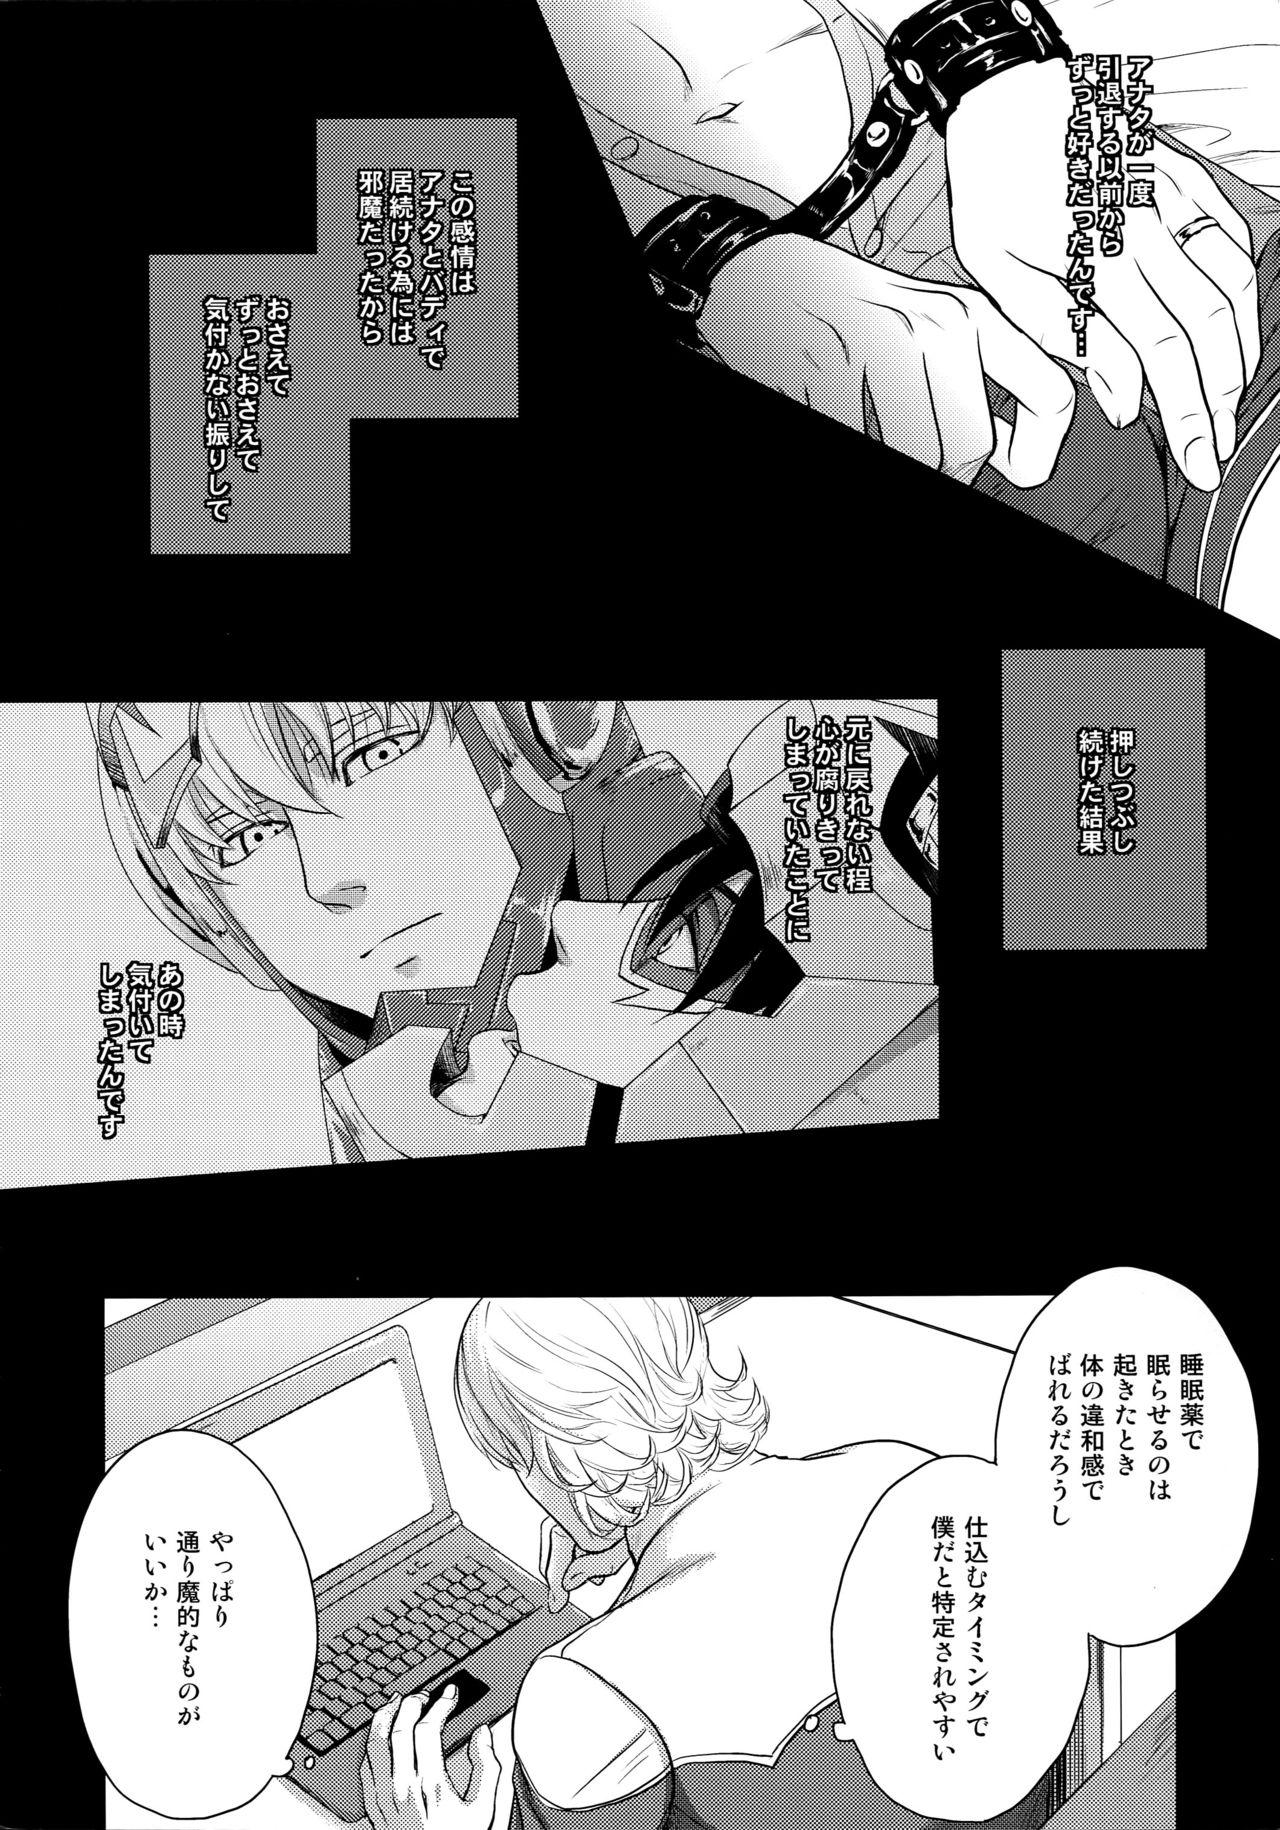 Hermosa RE.5UP2 - Tiger and bunny Colombiana - Page 5